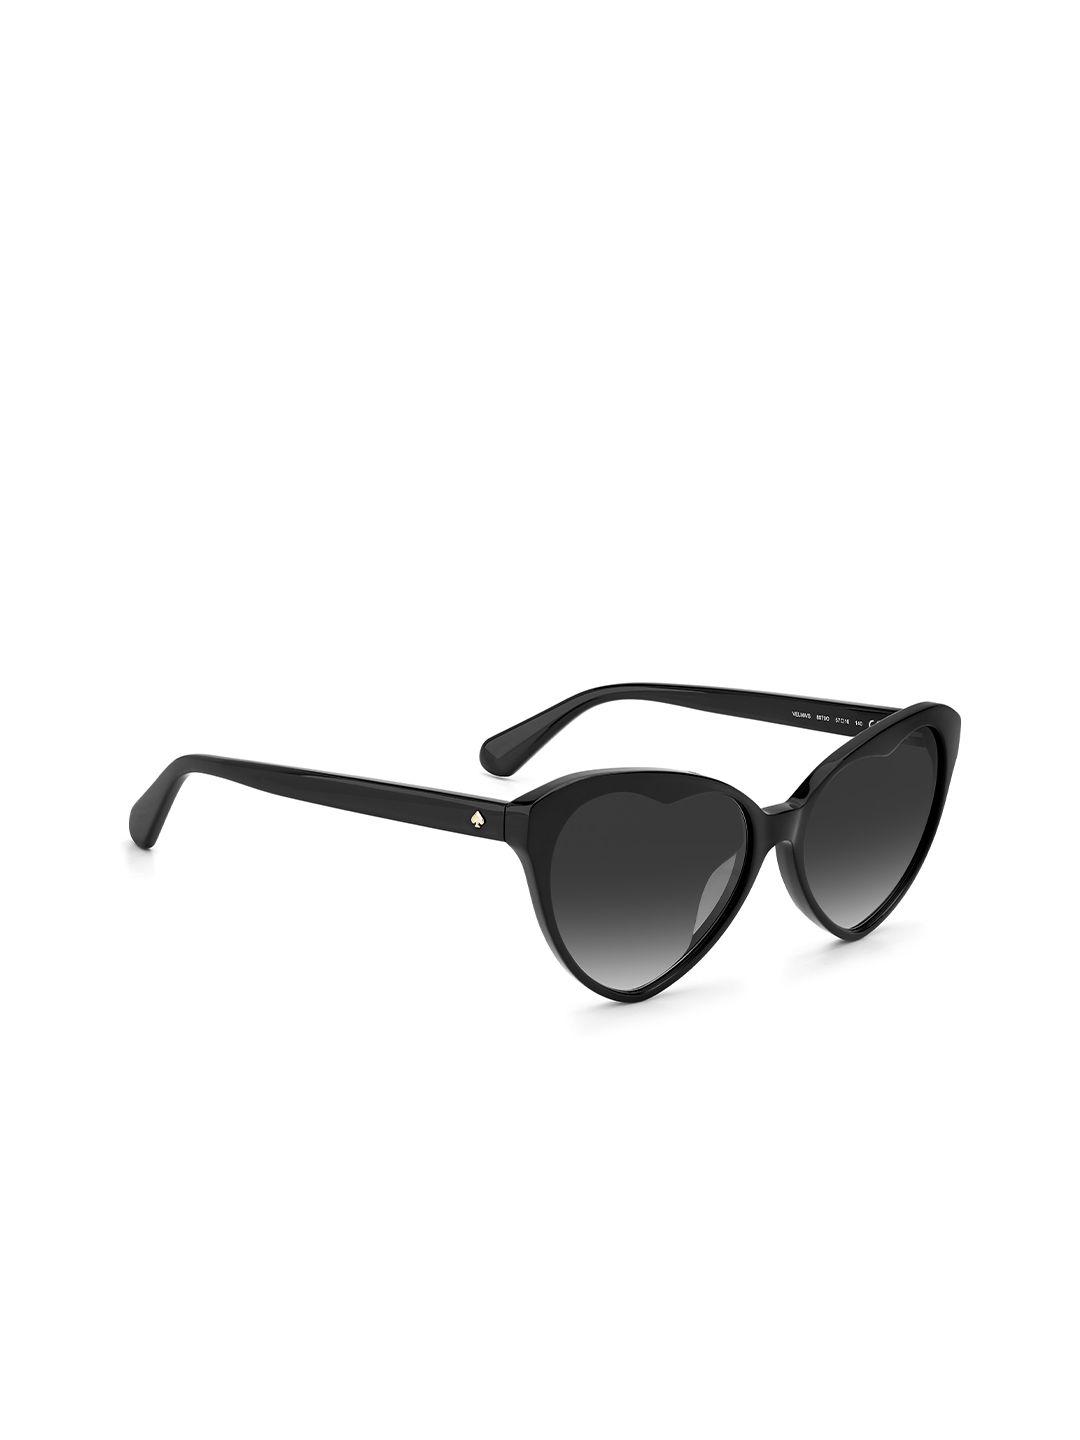 kate-spade-new-york-women-sunglasses-with-uv-protected-lens